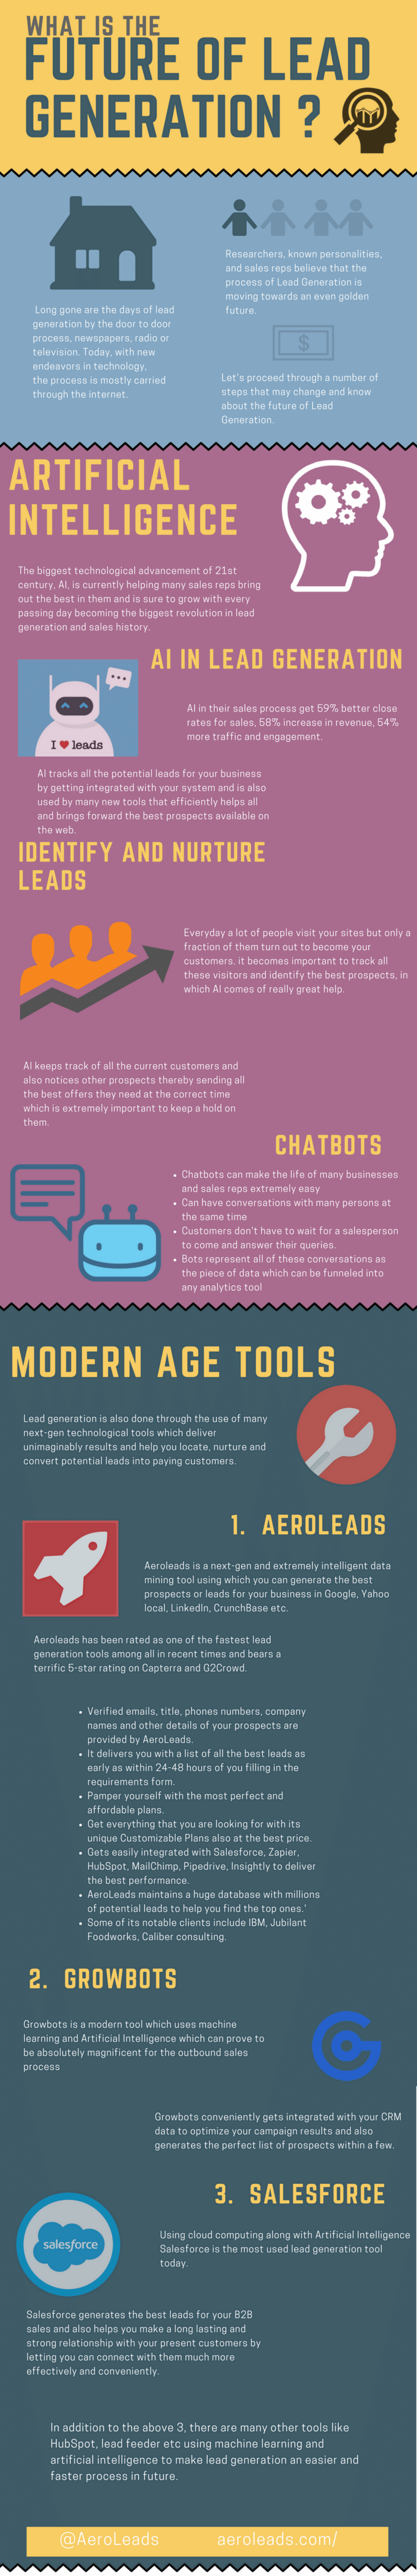 What is the Future of Lead Generation - Infographic